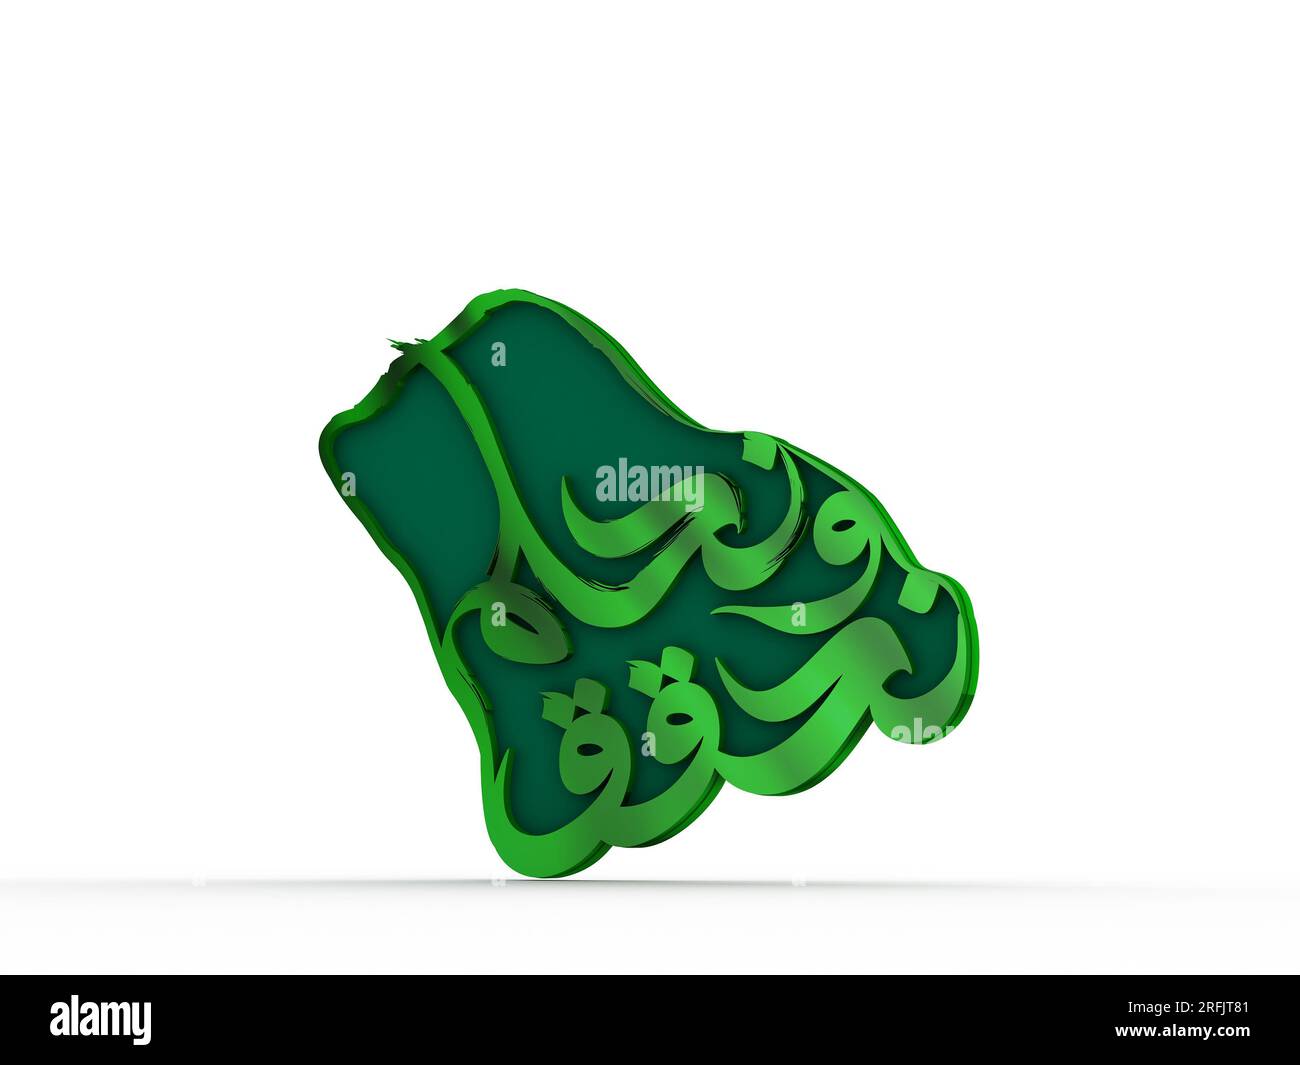 93rd Saudi Arabia National Day Identity with Arabic text saying 'We dream and achieve' Stock Photo